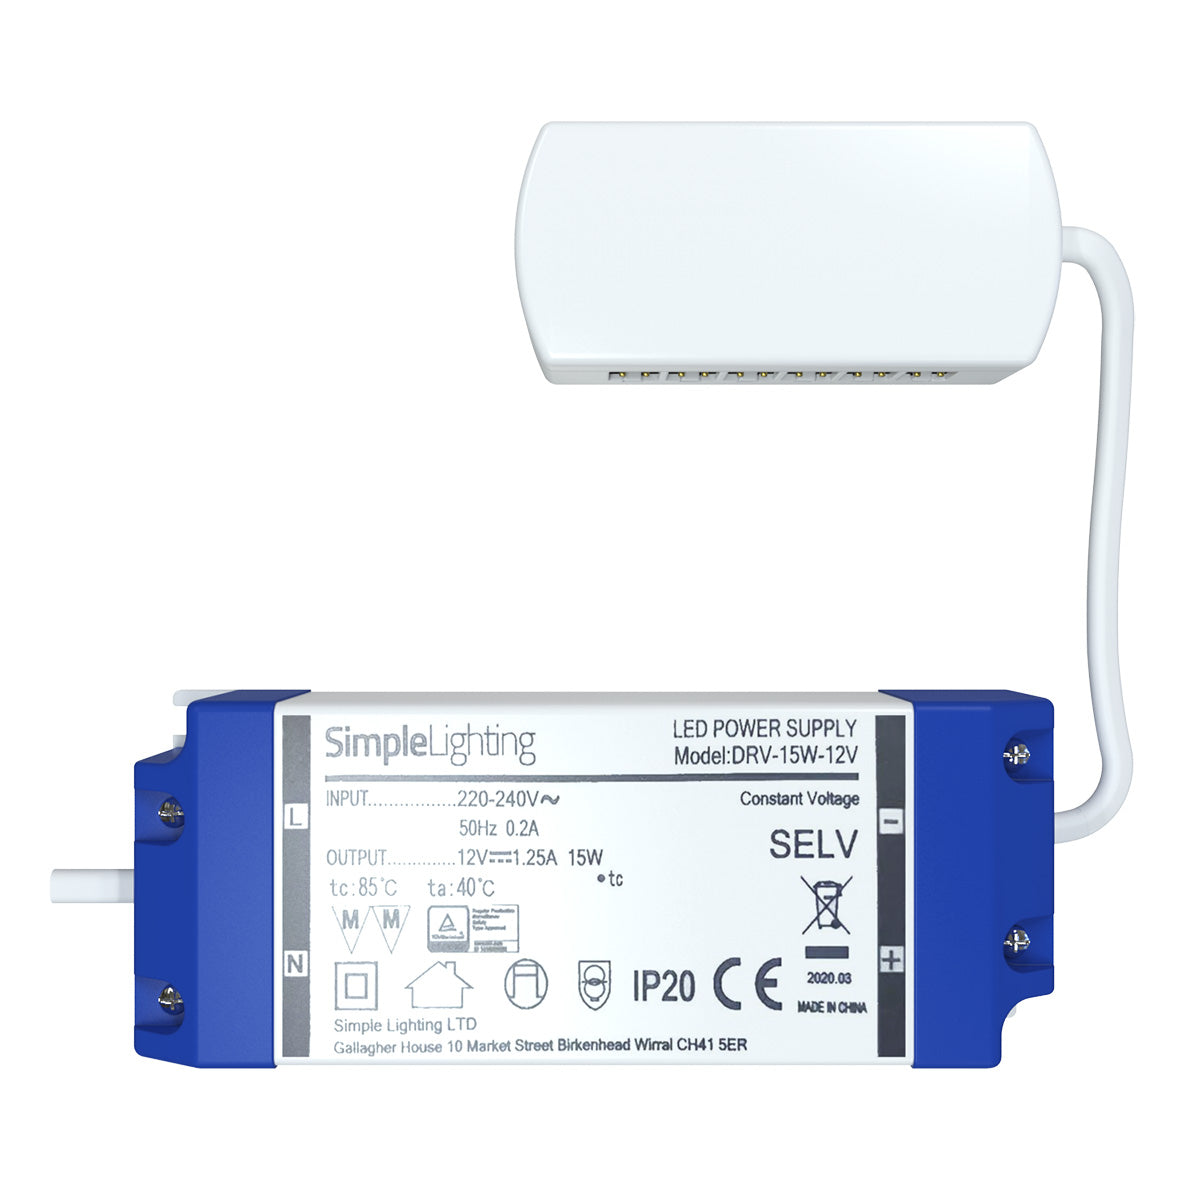 Mains wirable 50w LED Driver, with 6 way distributor.